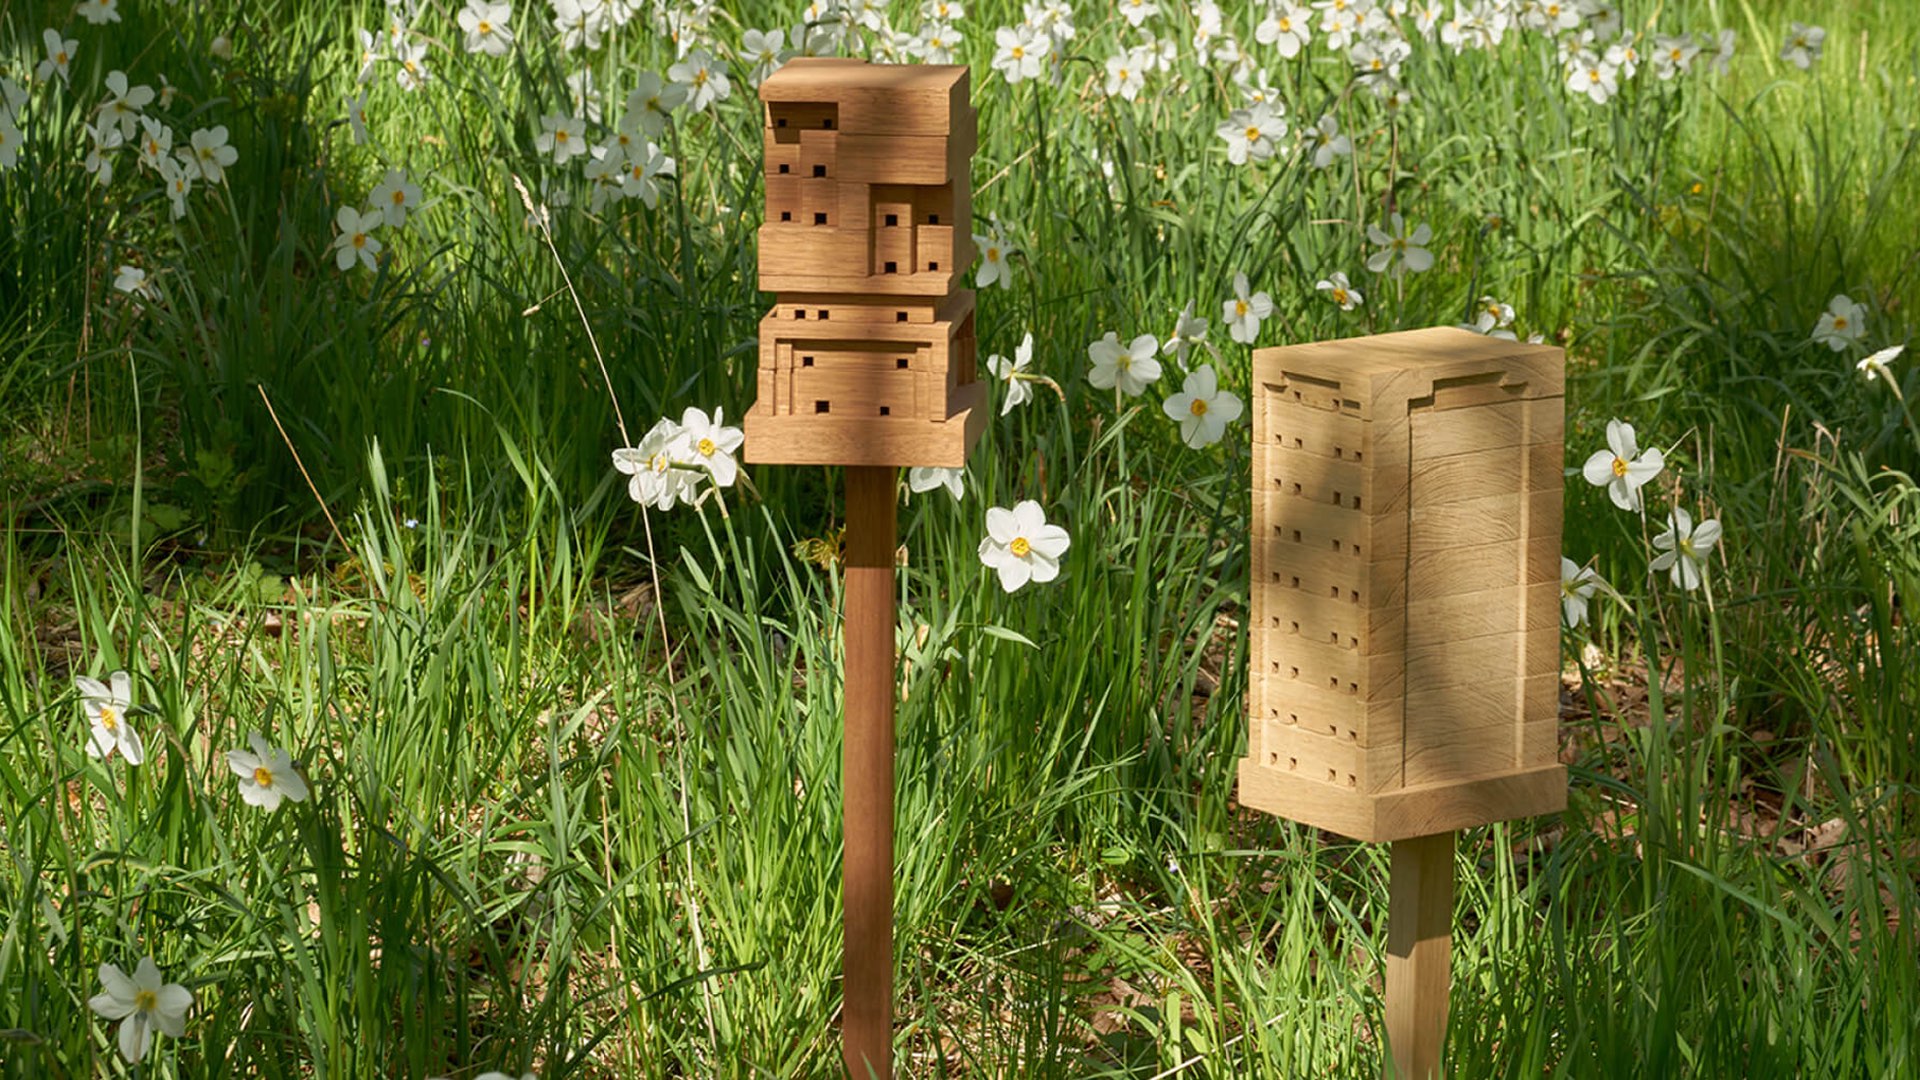 IKEA's SPACE10 launches 'Bee Home' as a free and open source design